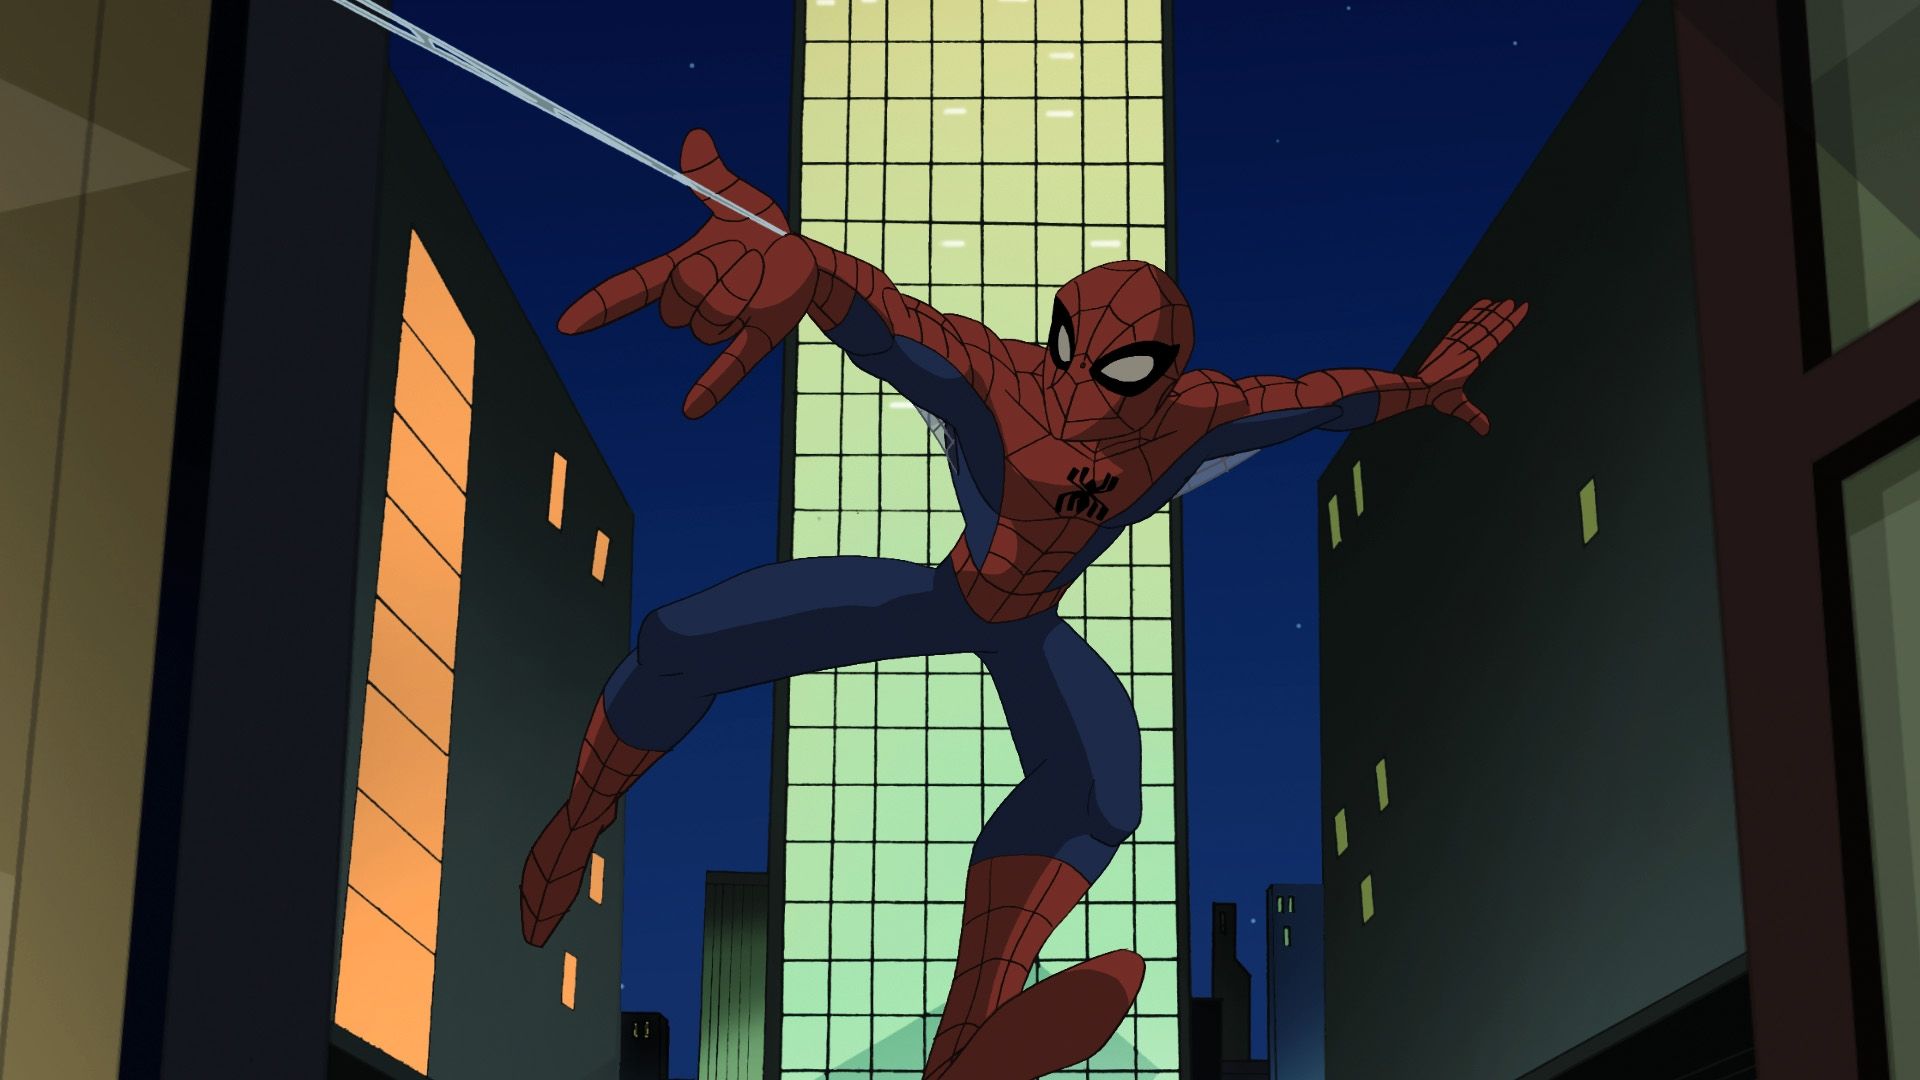 Free Download Spectacular Spiderman Wallpaper Viewing Gallery [1920x1080] For Your Desktop, Mobile & Tablet. Explore Spectacular Spider Man Wallpaper. Spectacular Spider Man Wallpaper, Spider Man Homecoming Spectacular Free Wallpaper, Spider